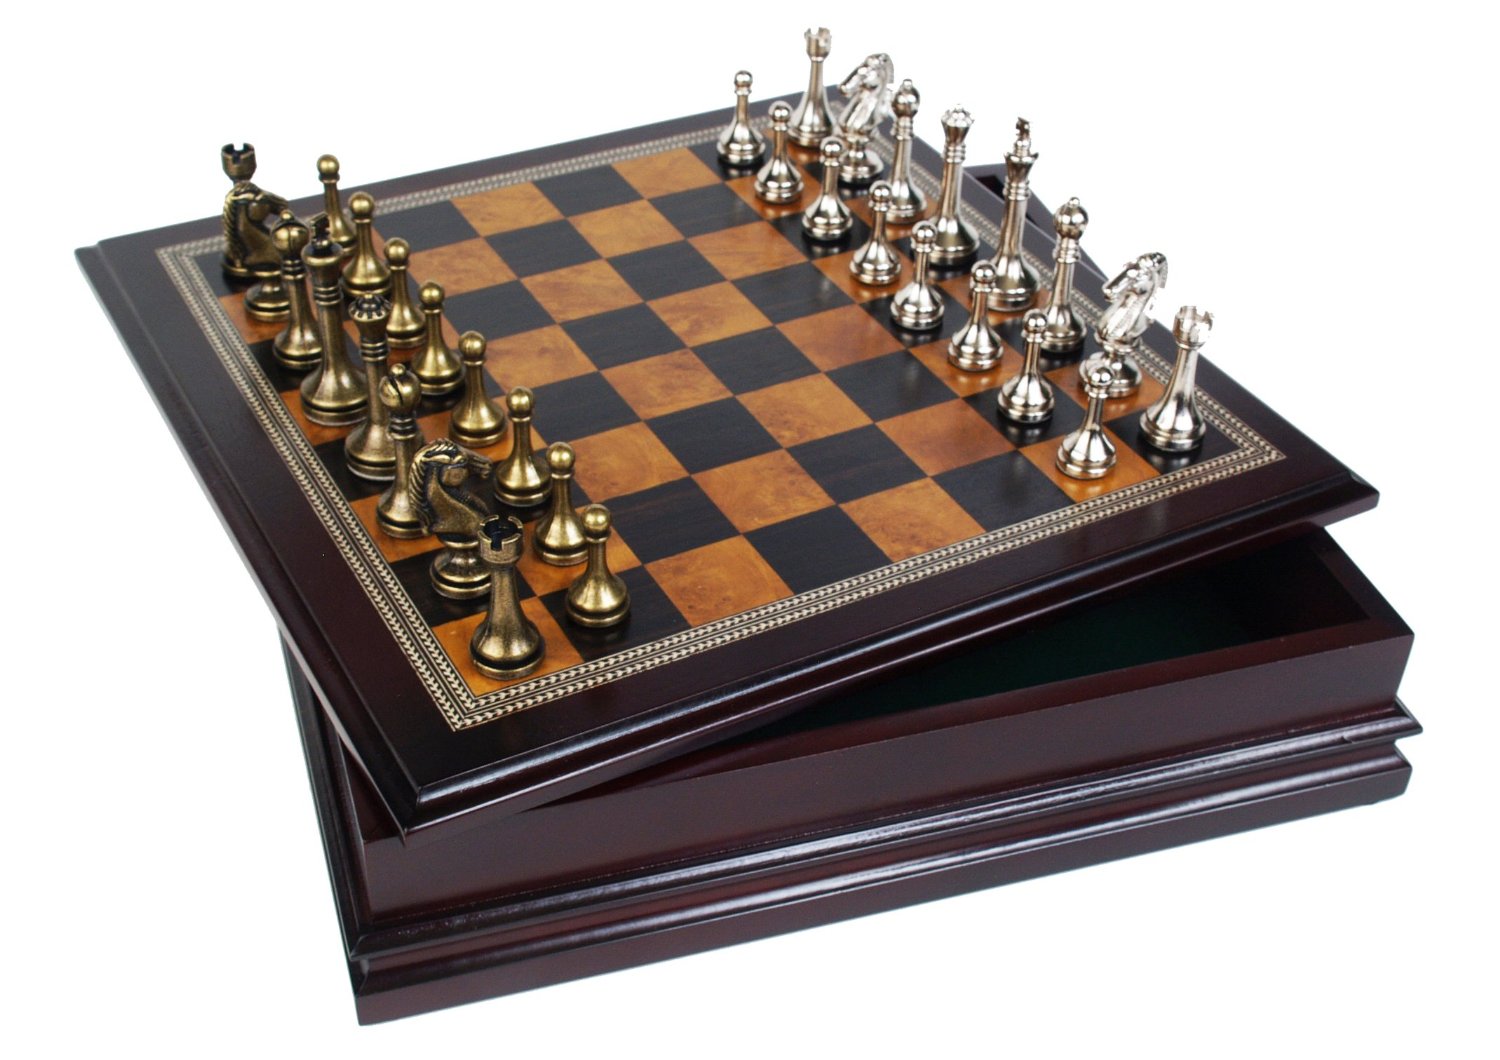 chees set goft idea fathers day 2016 Metal Chess Set With Deluxe Wood Board